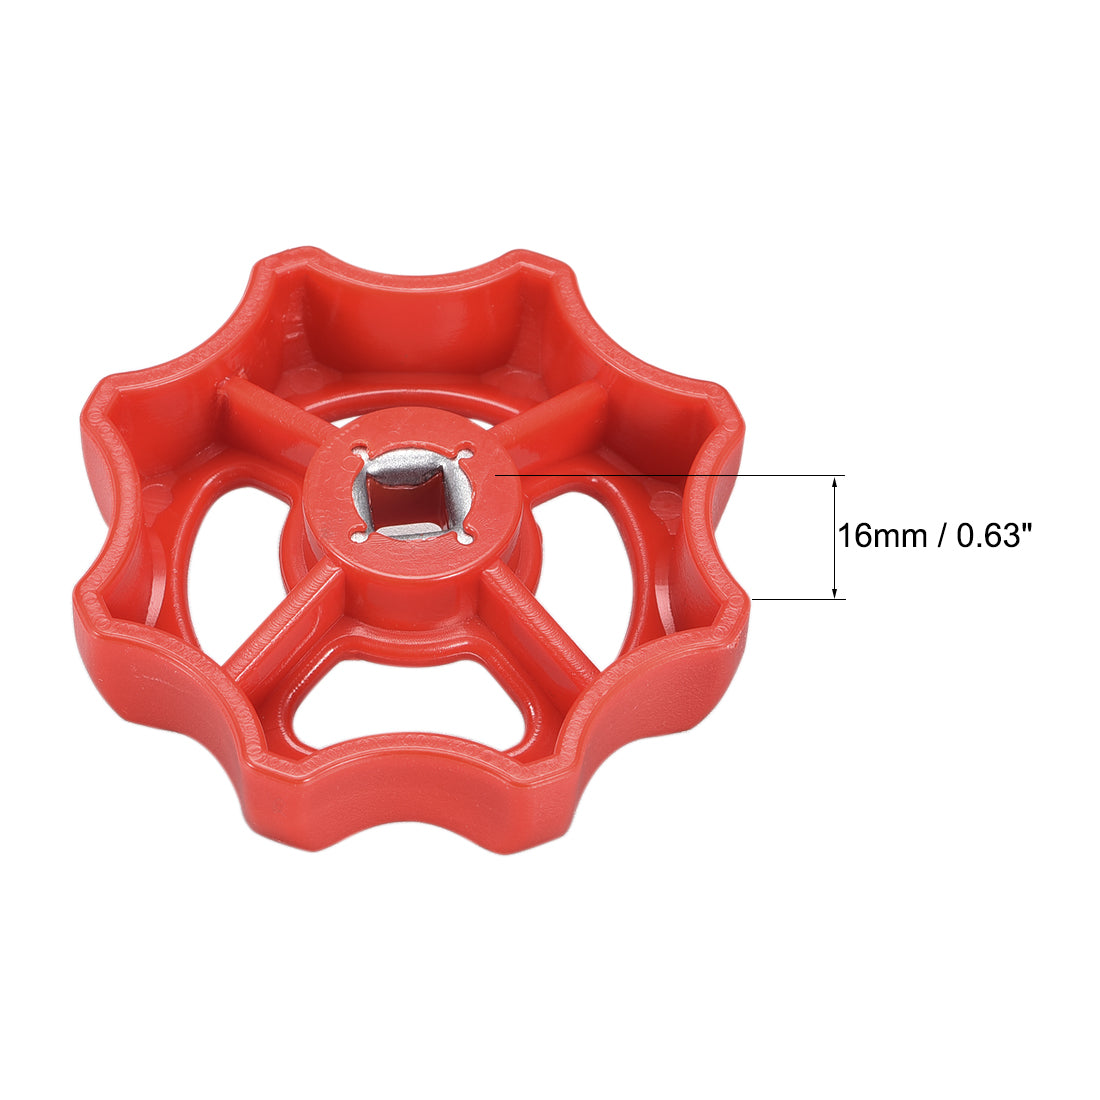 Uxcell Uxcell Round Wheel Handle, Square Broach 8x8mm, Wheel OD 74mm ABS Red 4Pcs